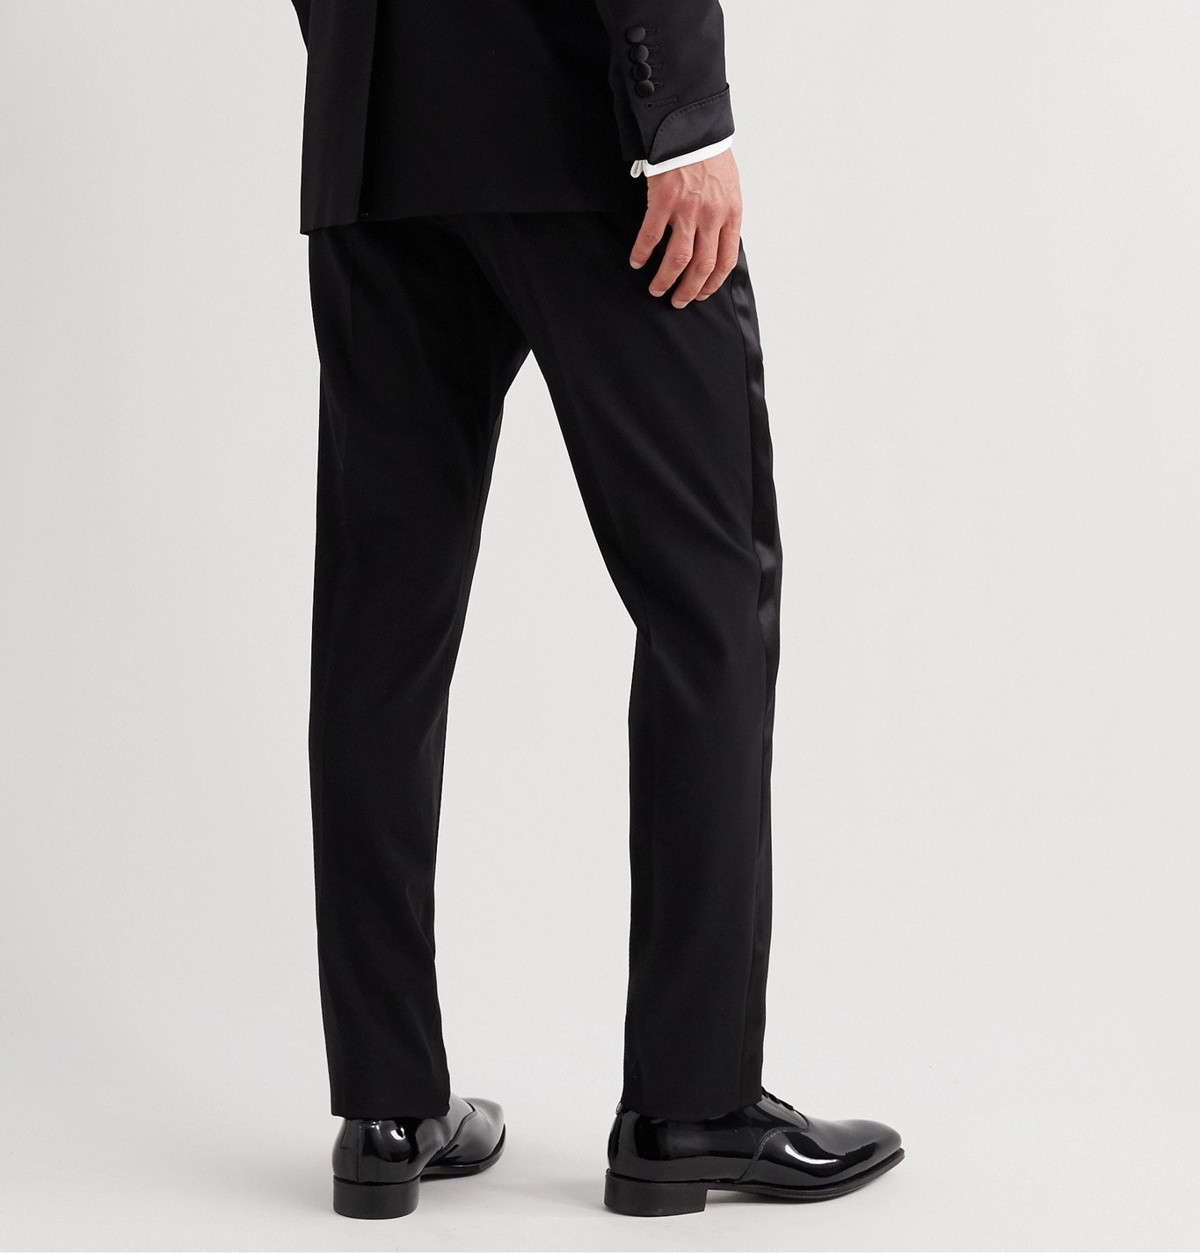 PINETS - BLACK | Slim Fit Suits | Ted Baker ROW